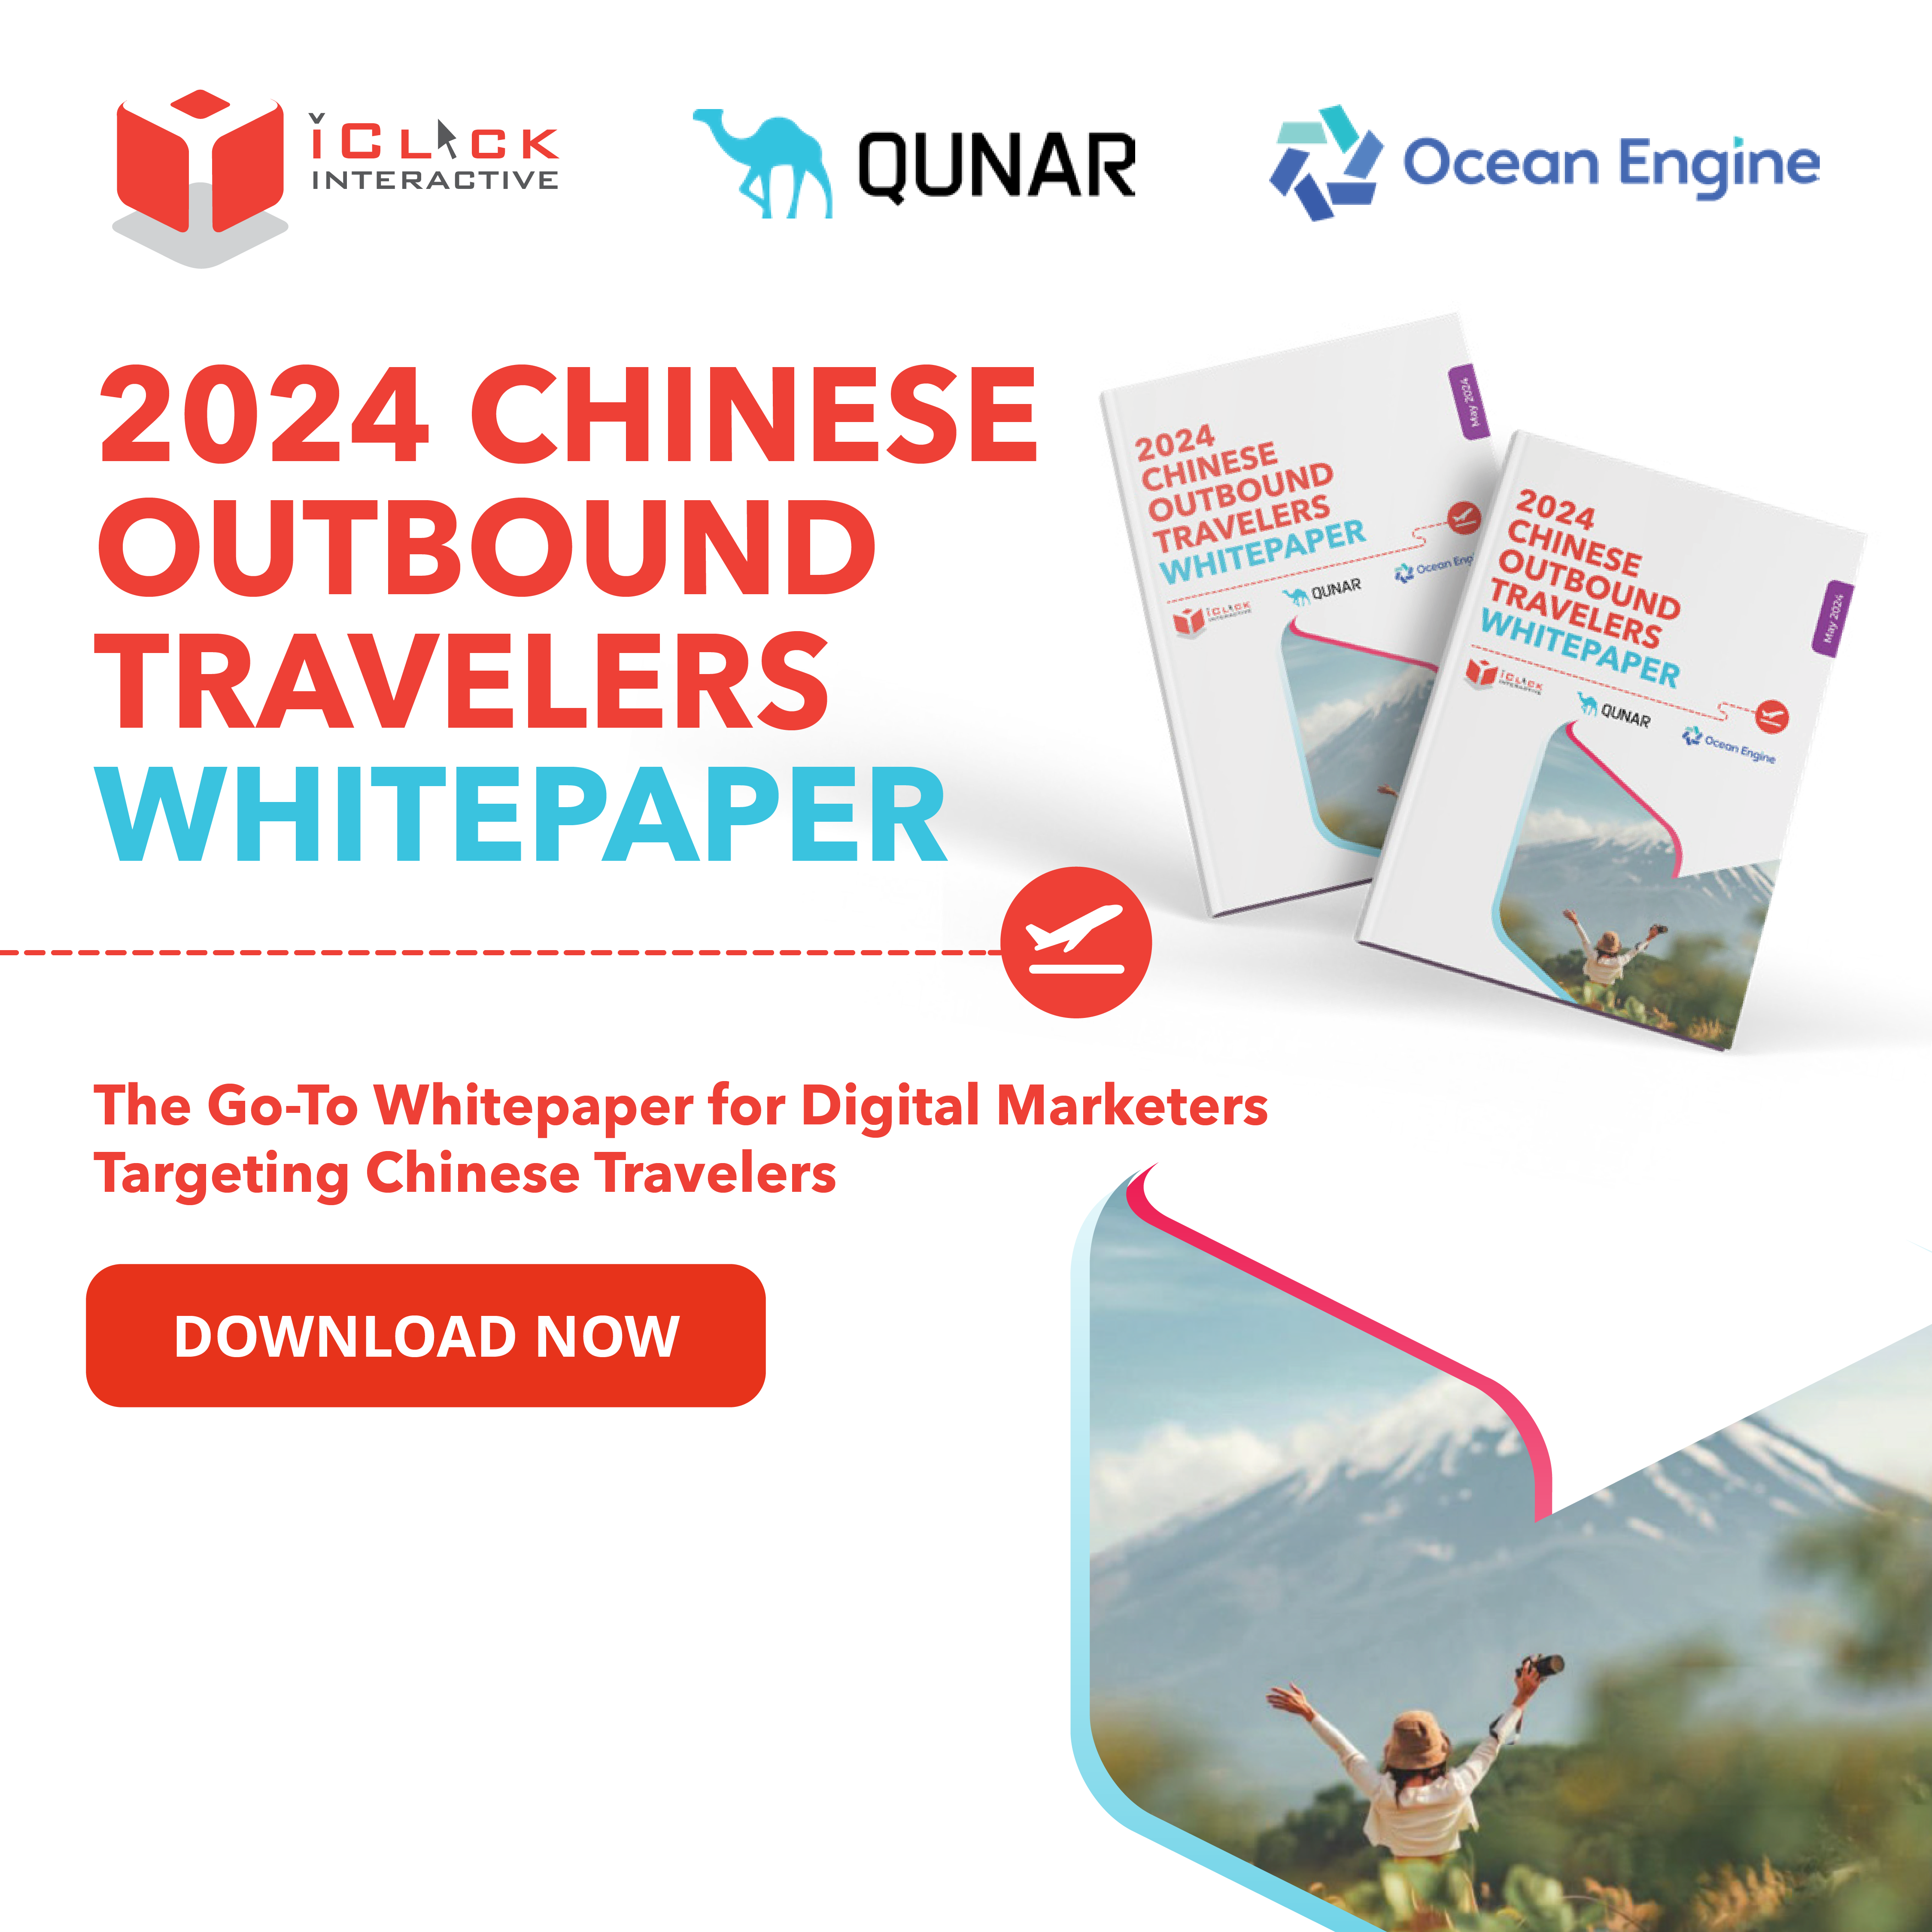 Exciting Release: iClick’s Chinese Outbound Travelers Whitepaper 2024 (for JP Market)